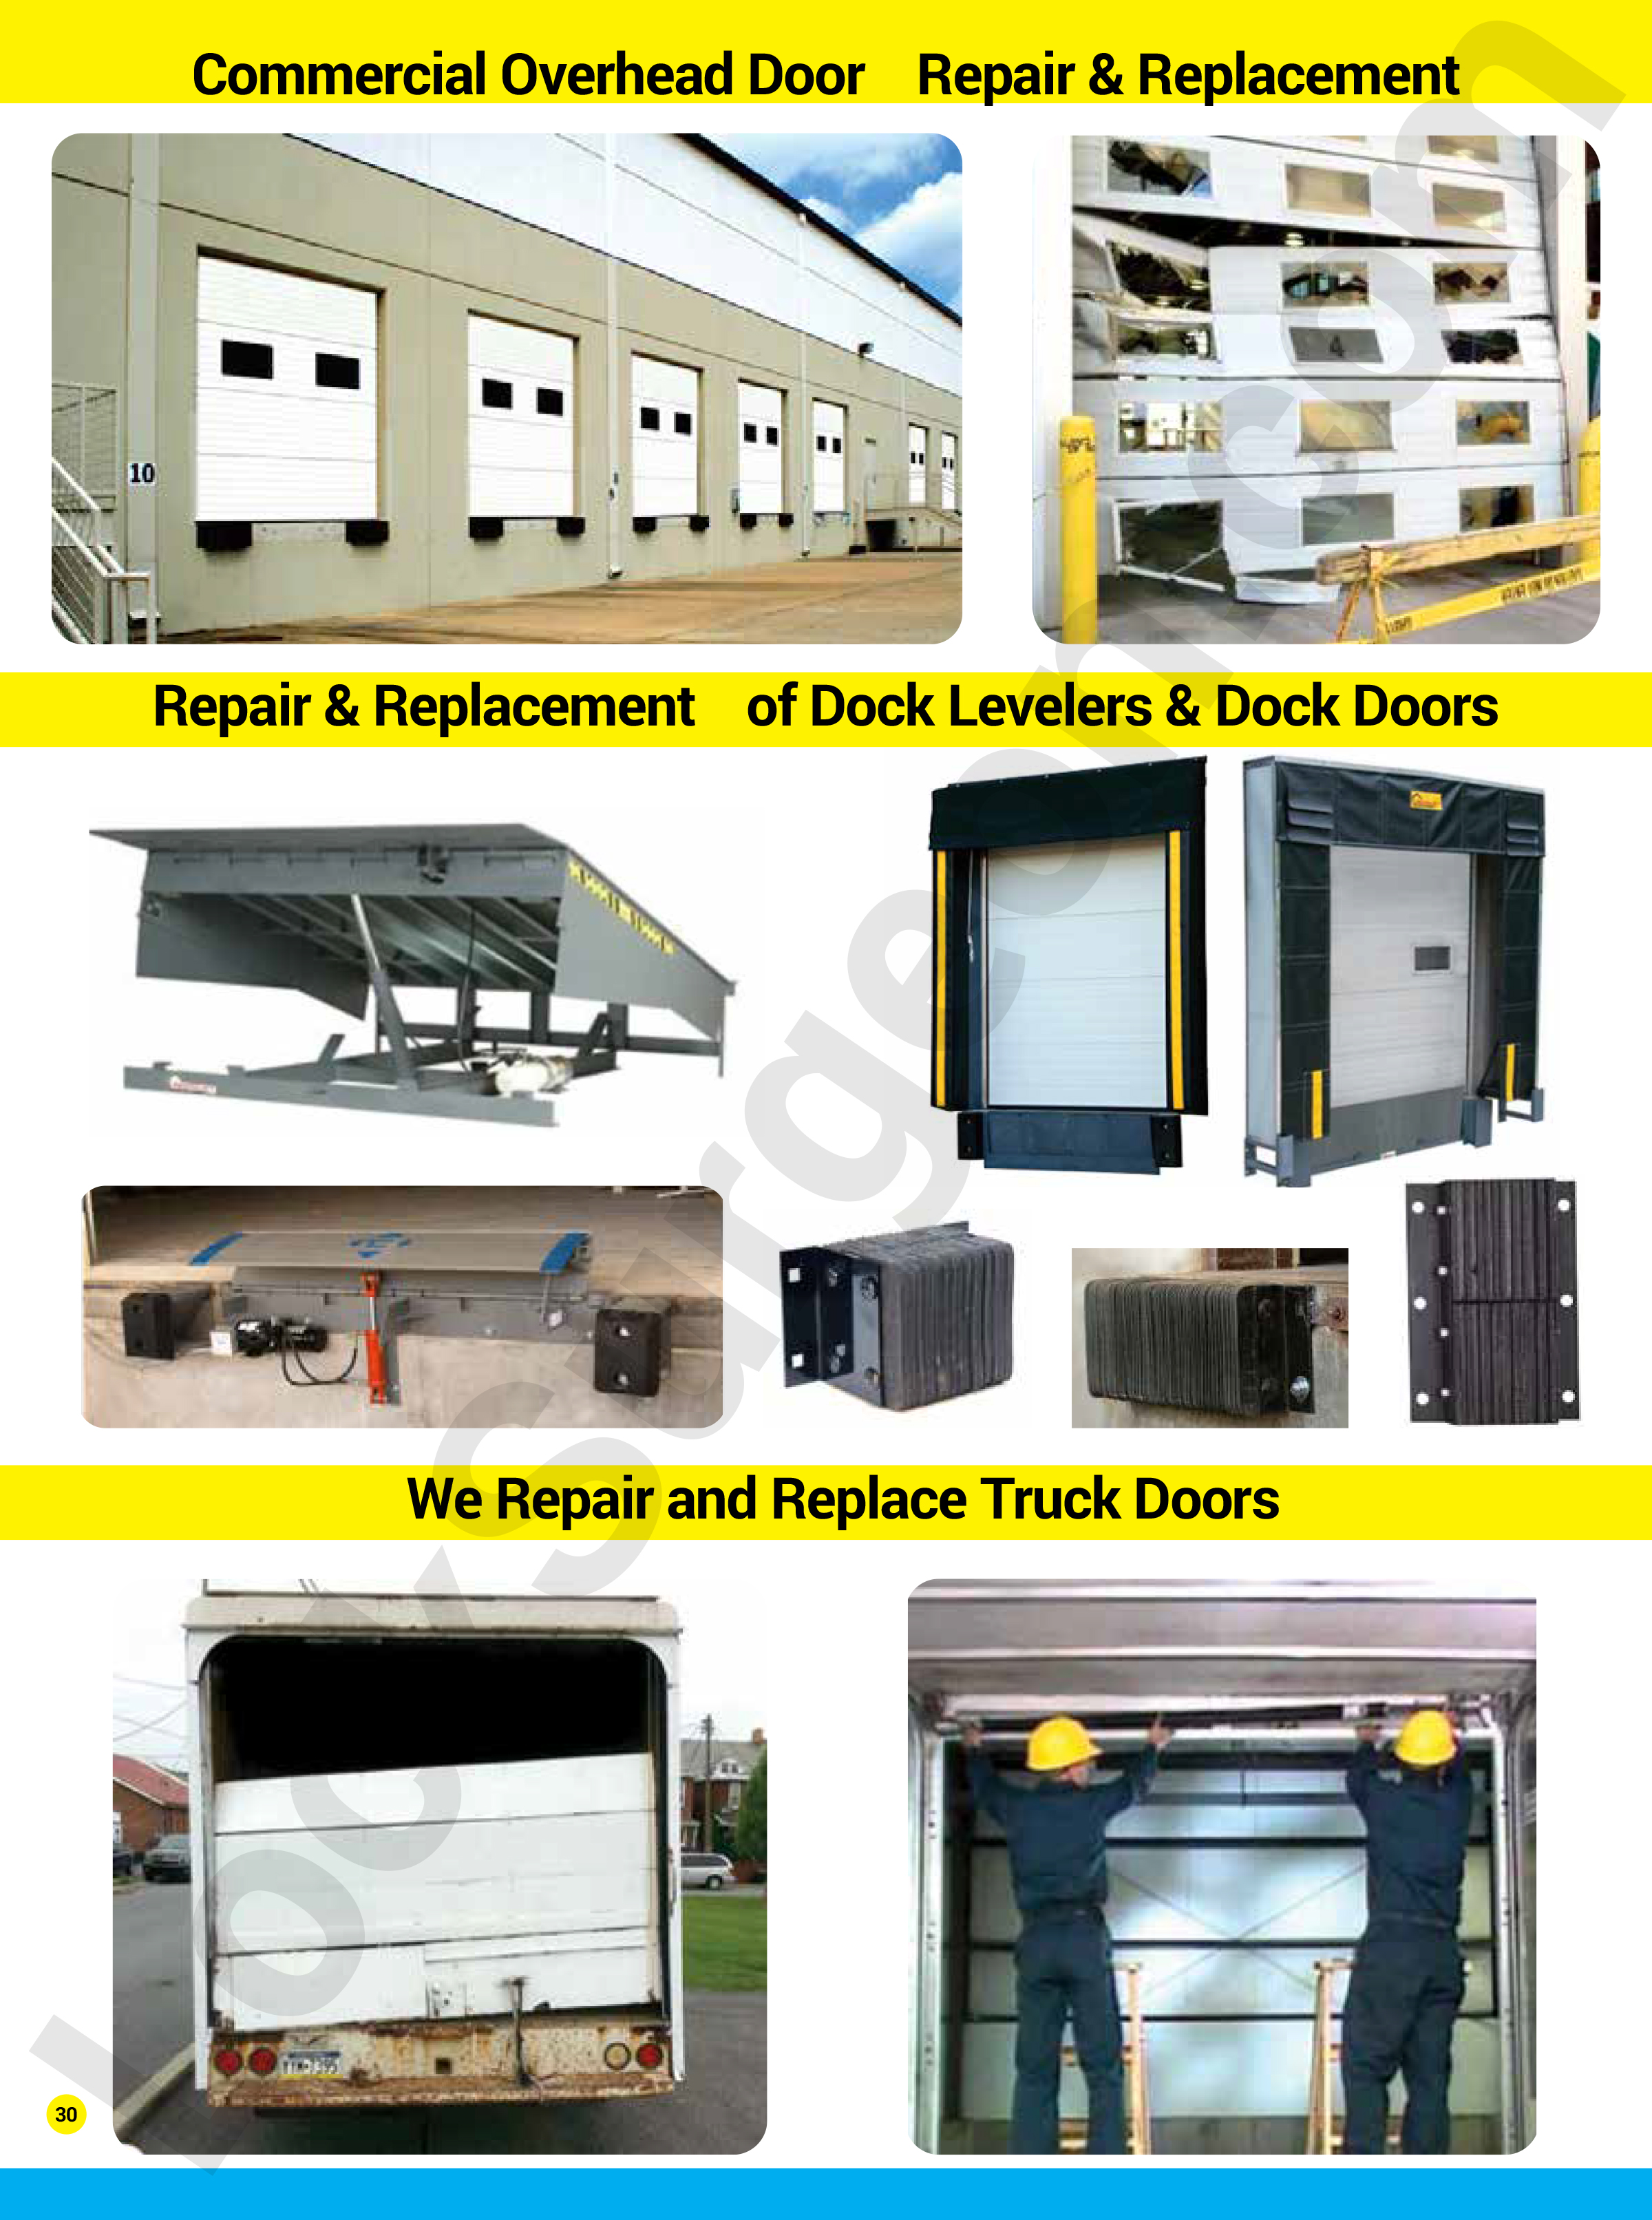 Lock Surgeon professional locksmiths provide mobile repair or replacement of commercial overhead doors, loading dock levelers and truck roll-up doors.